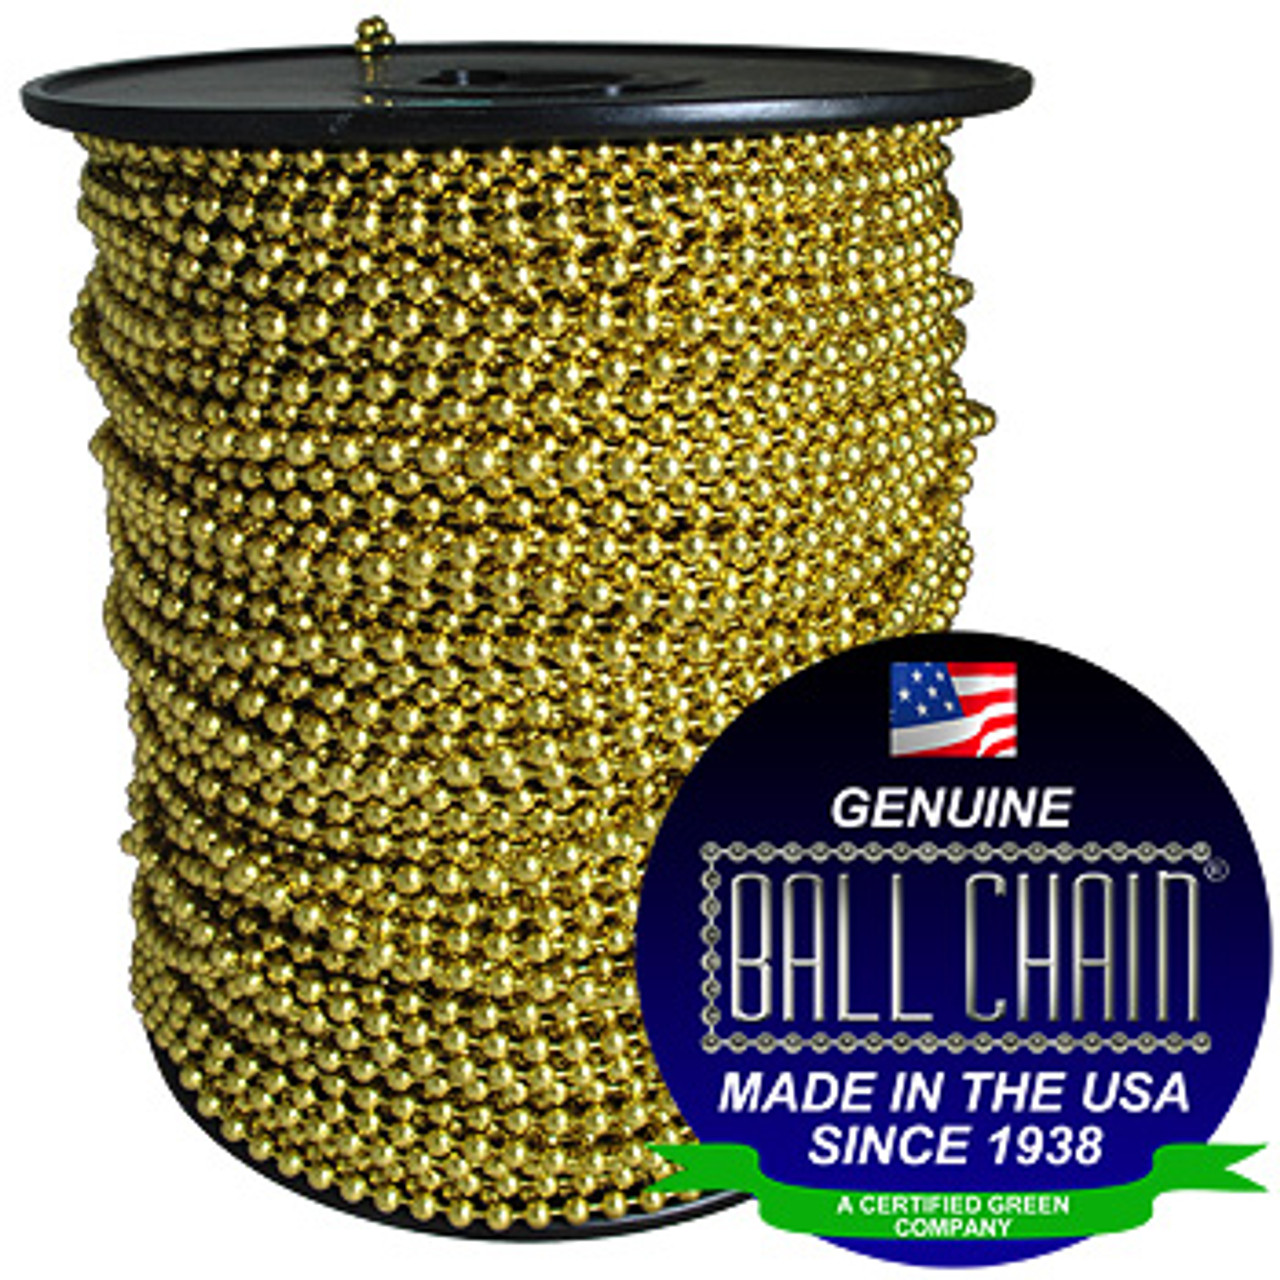 #1 Yellow Brass Ball Chain Spool. Purchase this bead chain in bulk. it comes in a variety of spool sizes 100 foot spools to 2000 foot rolls of ball chain.